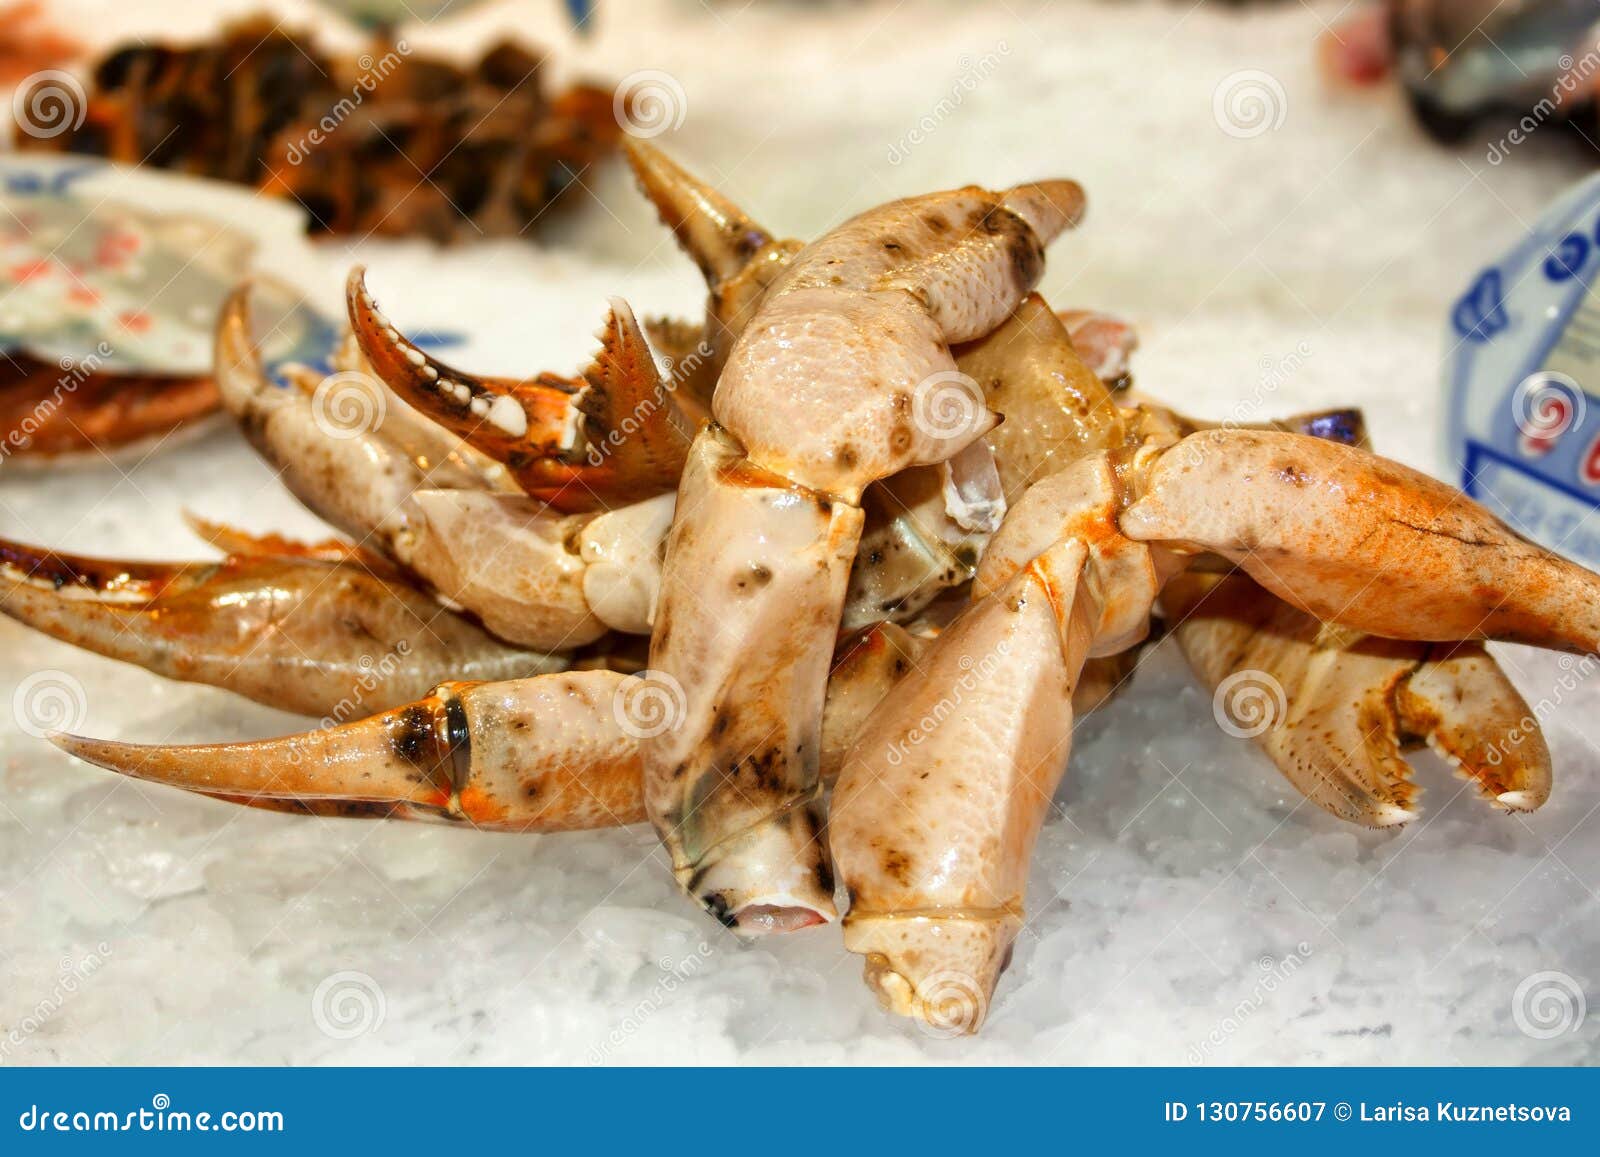 Large crab claws stock image. Image of appetite, gourmet - 130756607